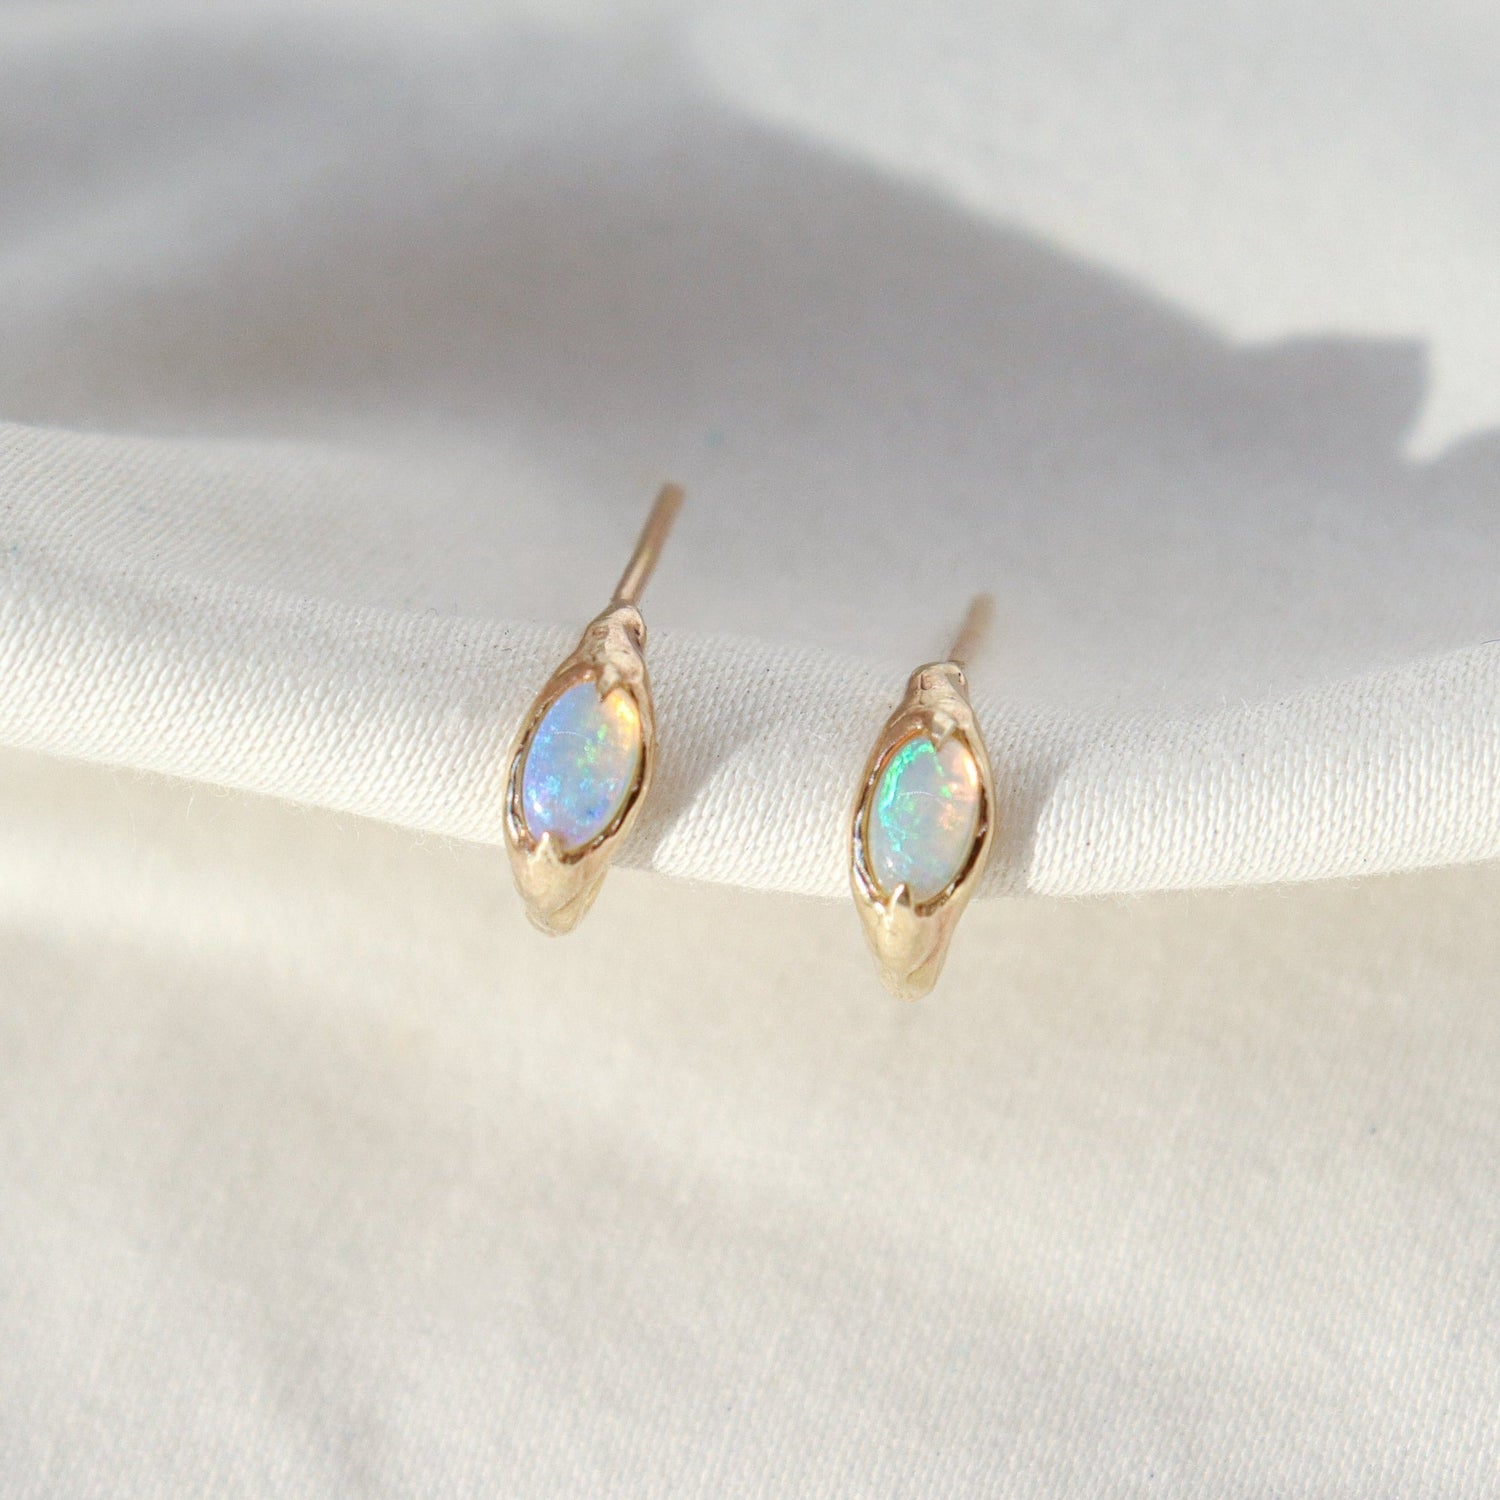 Tiny opal huggie hoops are positioned on a white background